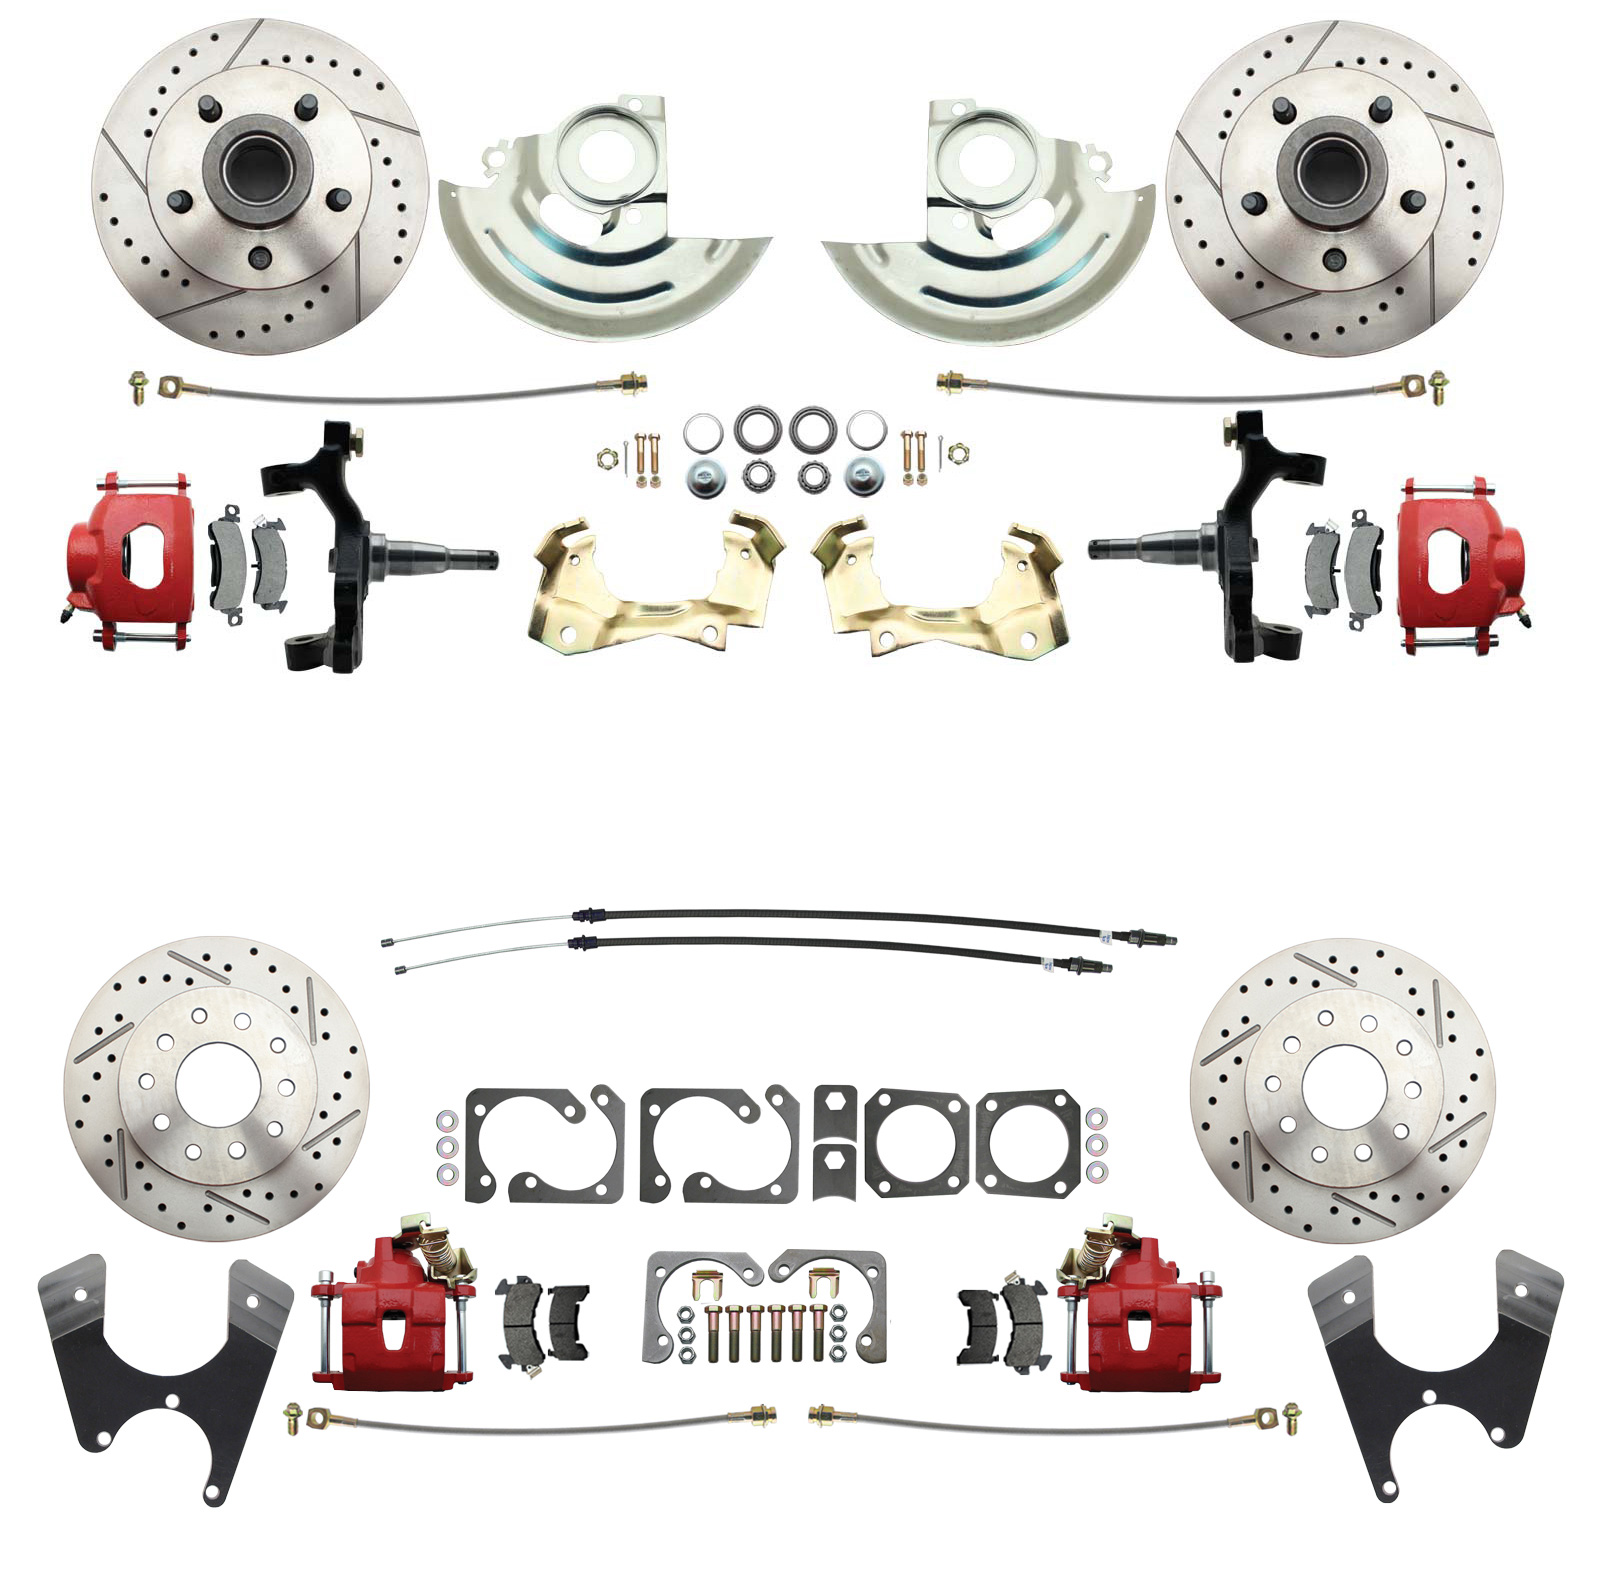 1964-1972 GM A Body (Chevelle, GTO, Cutlass) 2 Drop Front & Rear Disc Brake Kit W/ Drilled & Slotted Rotors Red Calipers